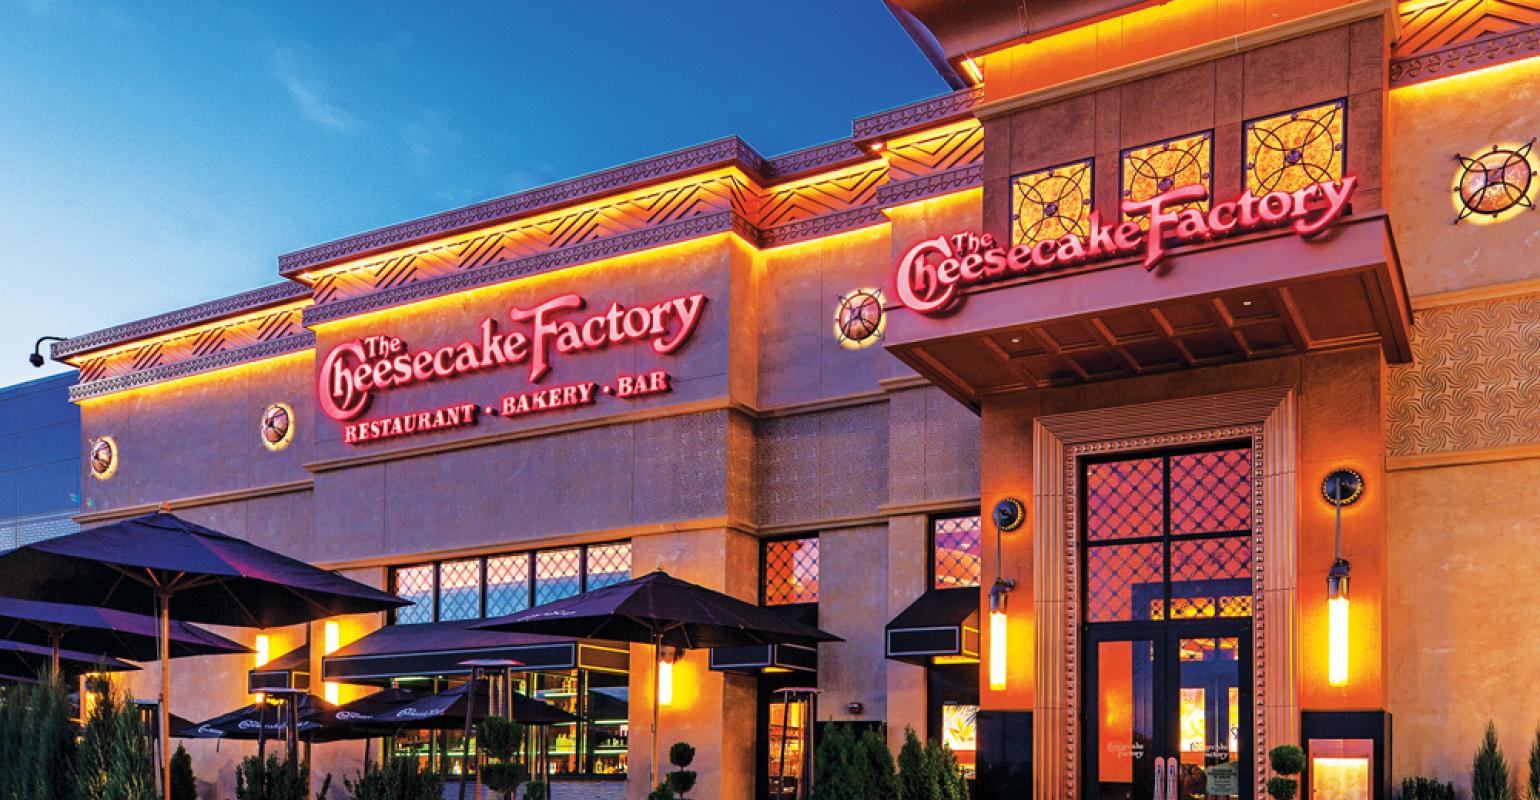 Cheesecake Factory sees large unit size as a reopening advantage